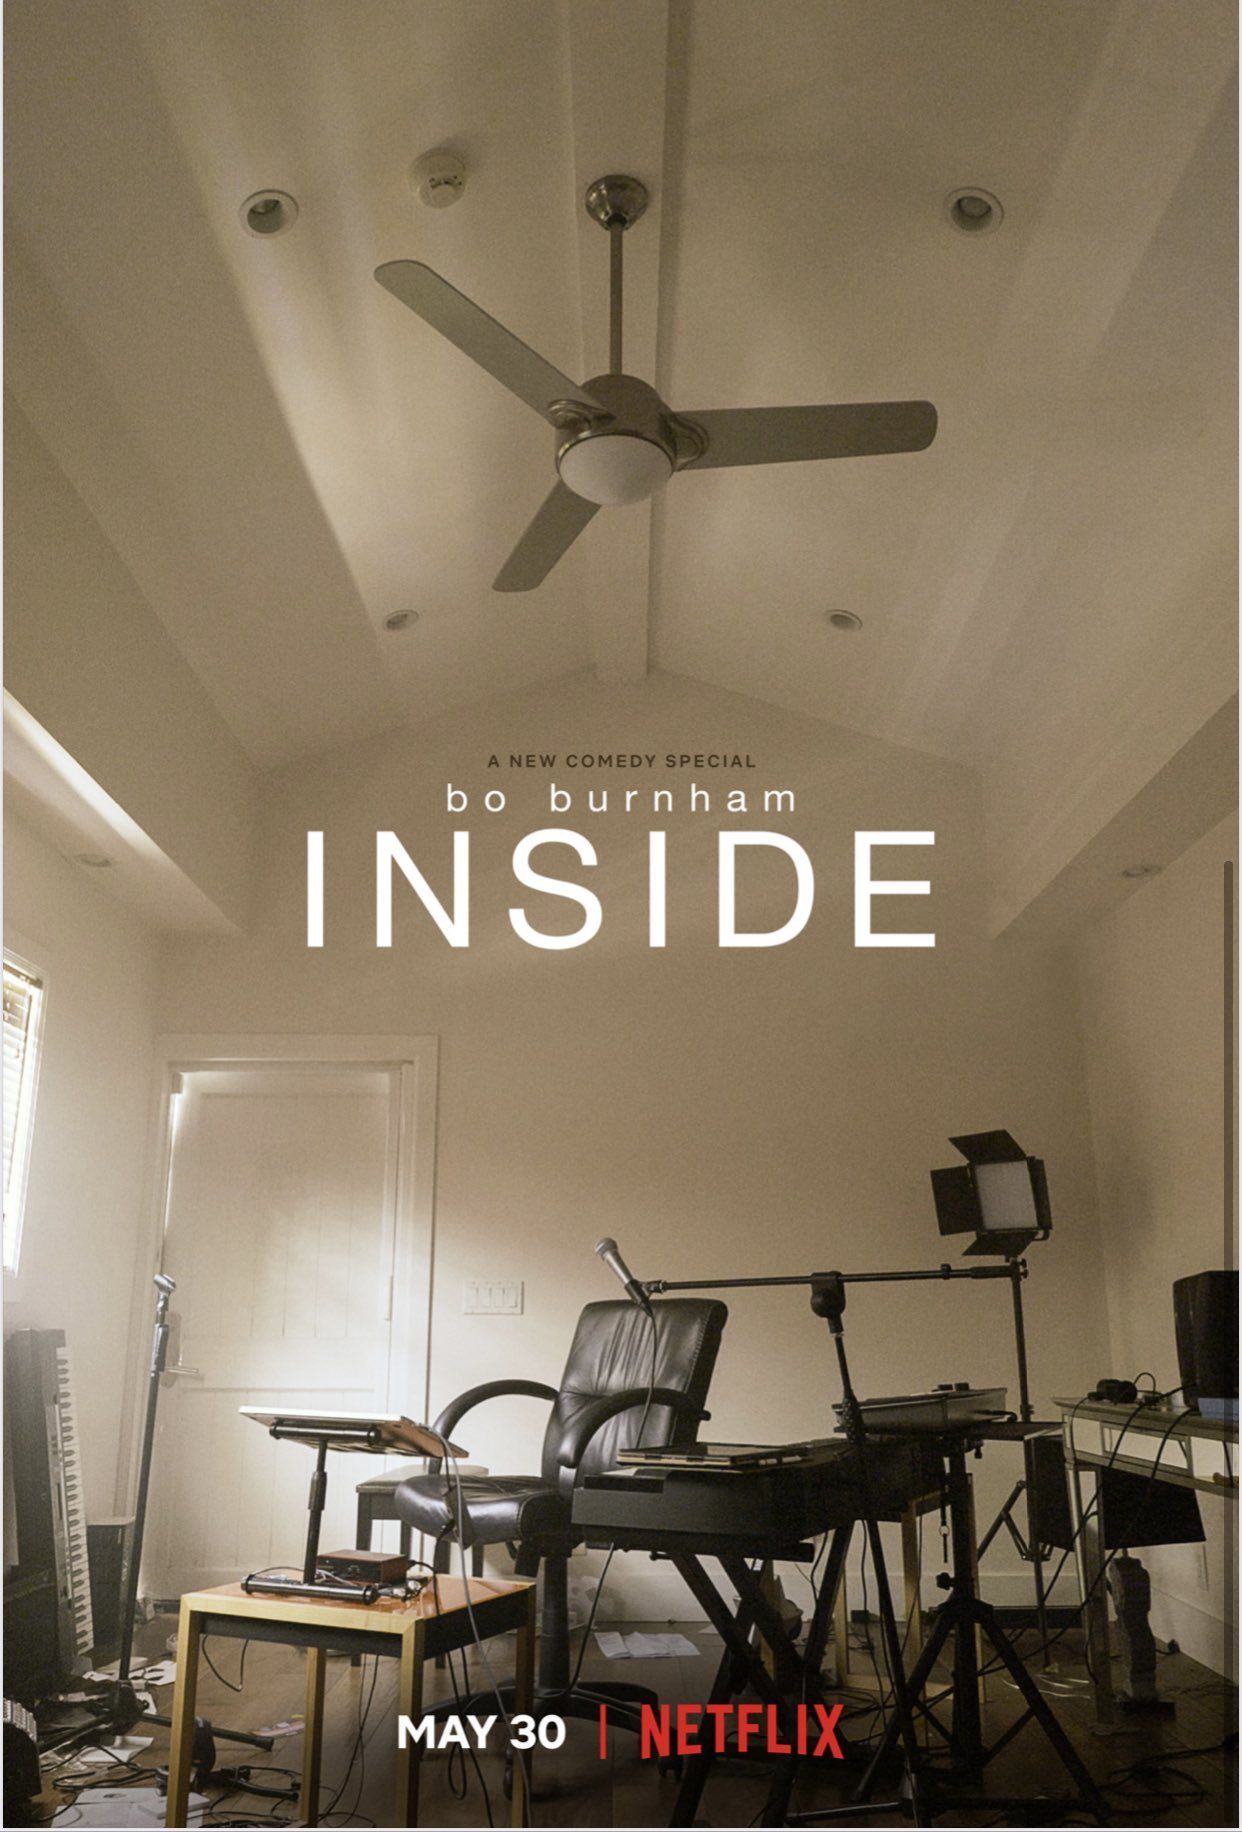 The Content House: On Bo Burnham’s “Inside” and “The Inside Outtakes”